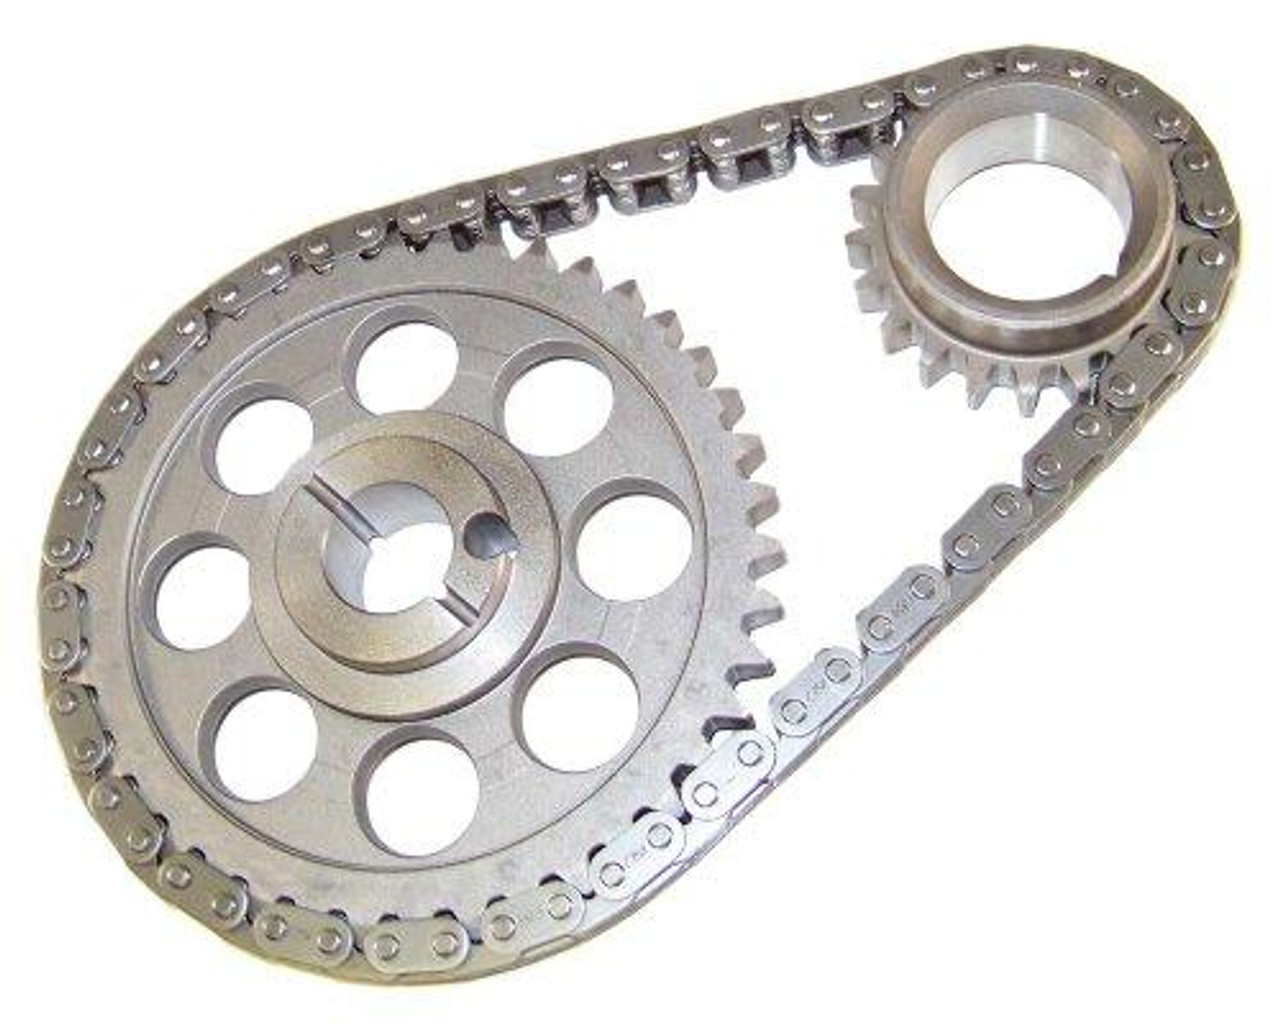 Timing Chain Kit - 1985 Ford Thunderbird 5.0L Engine Parts # TK4104ZE21